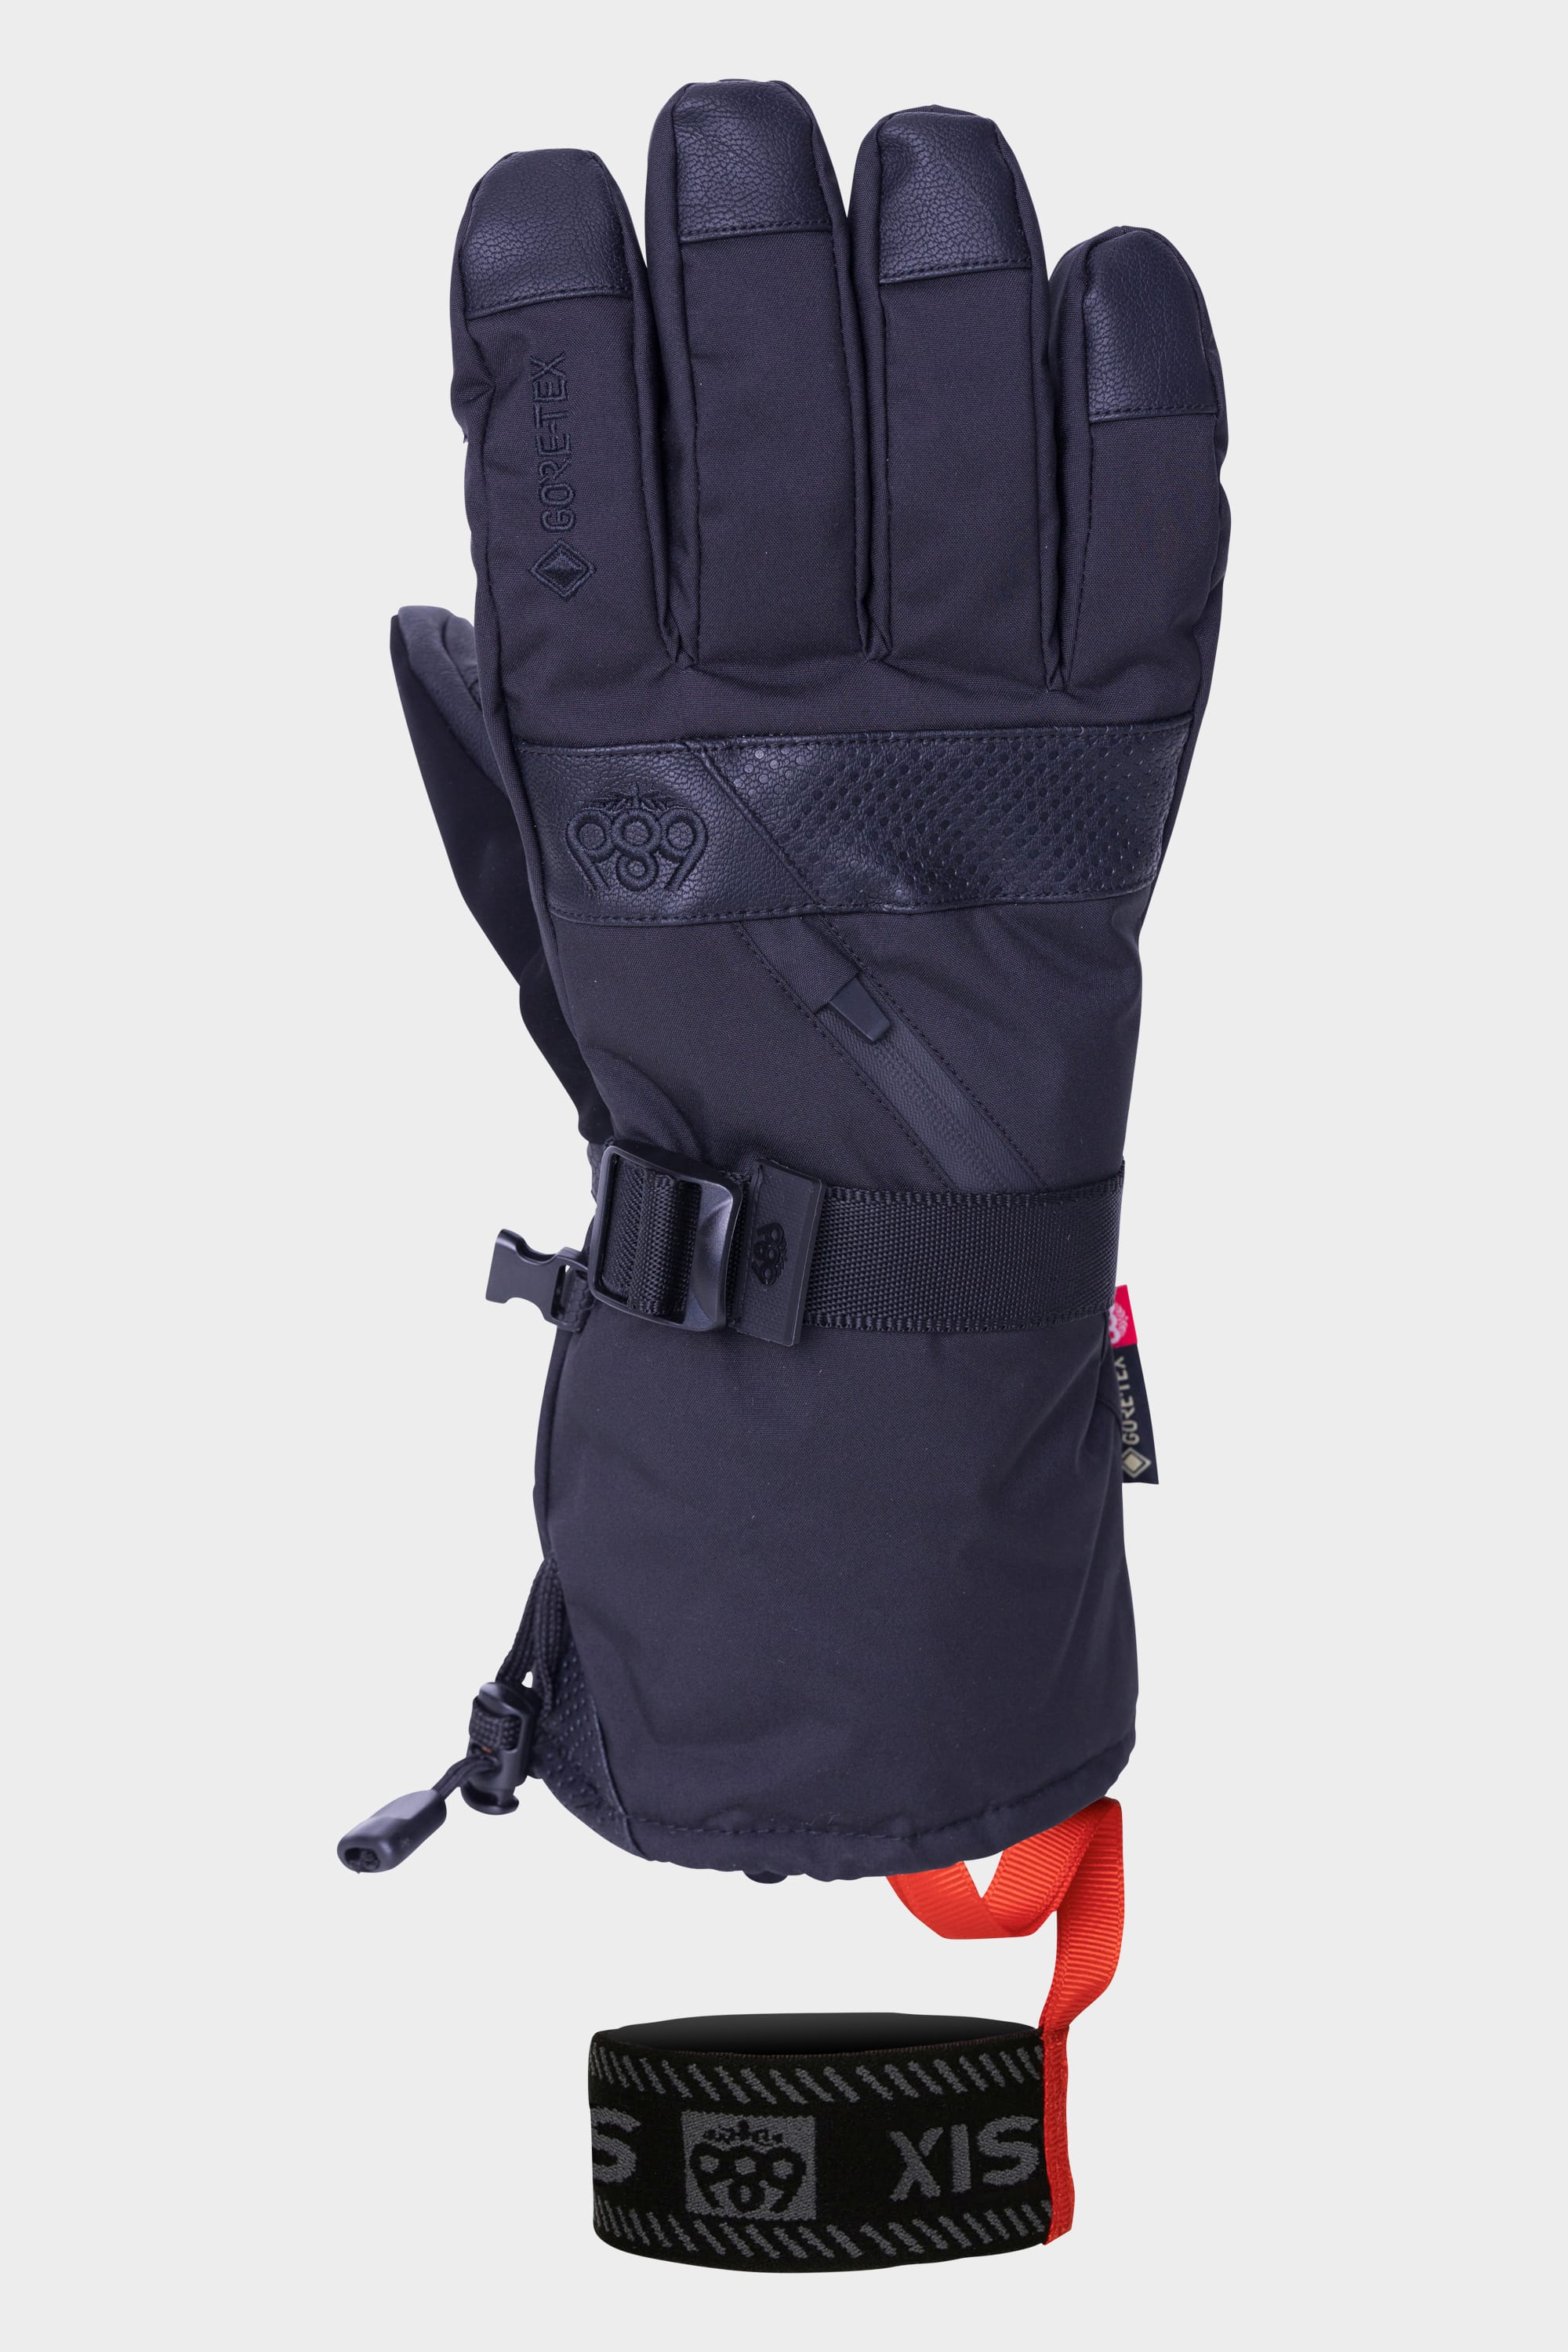 Stay Warm and Stylish with The North Face Big Mountain Gloves